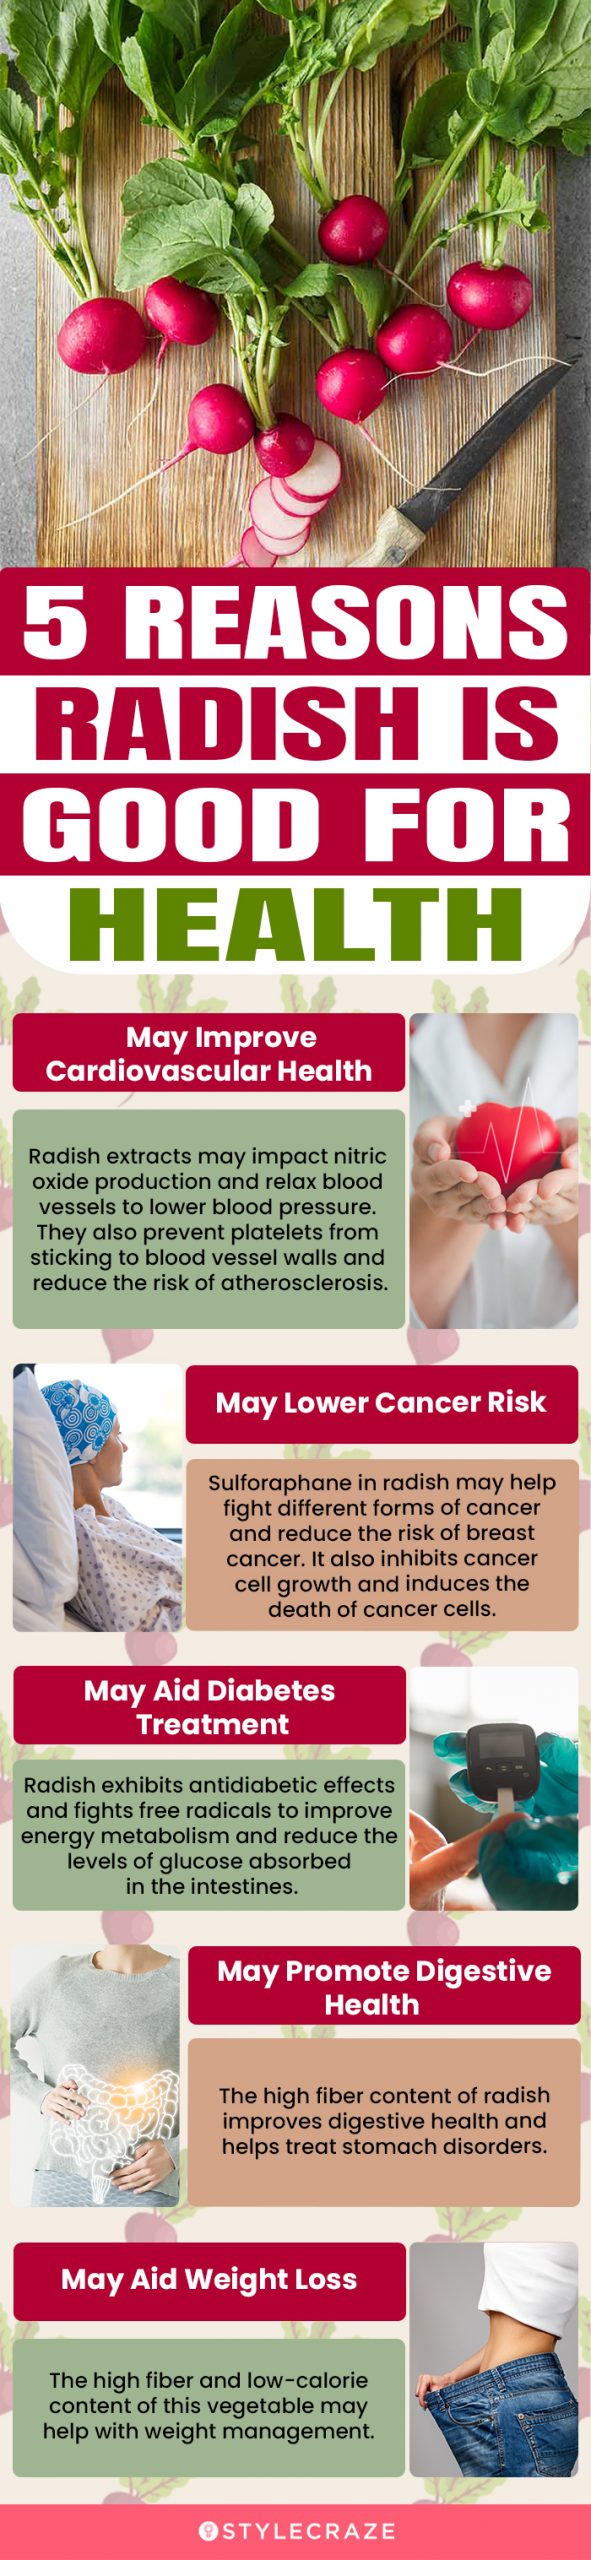 5 reasons radish is good for health (infographic)